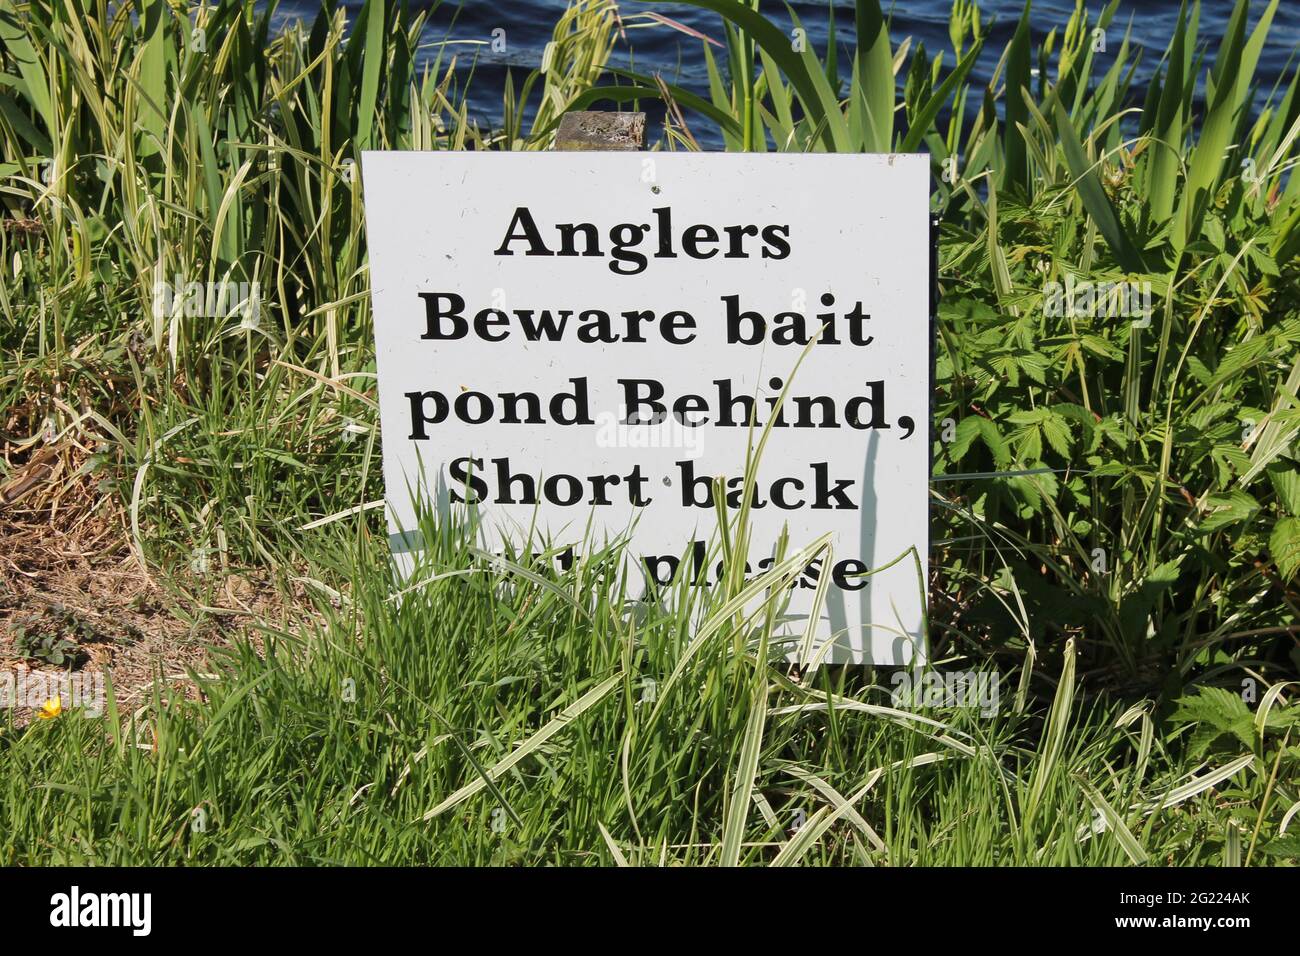 Anglers beware bait pond behind. Back casts please. sign partially obscured by grass Stock Photo